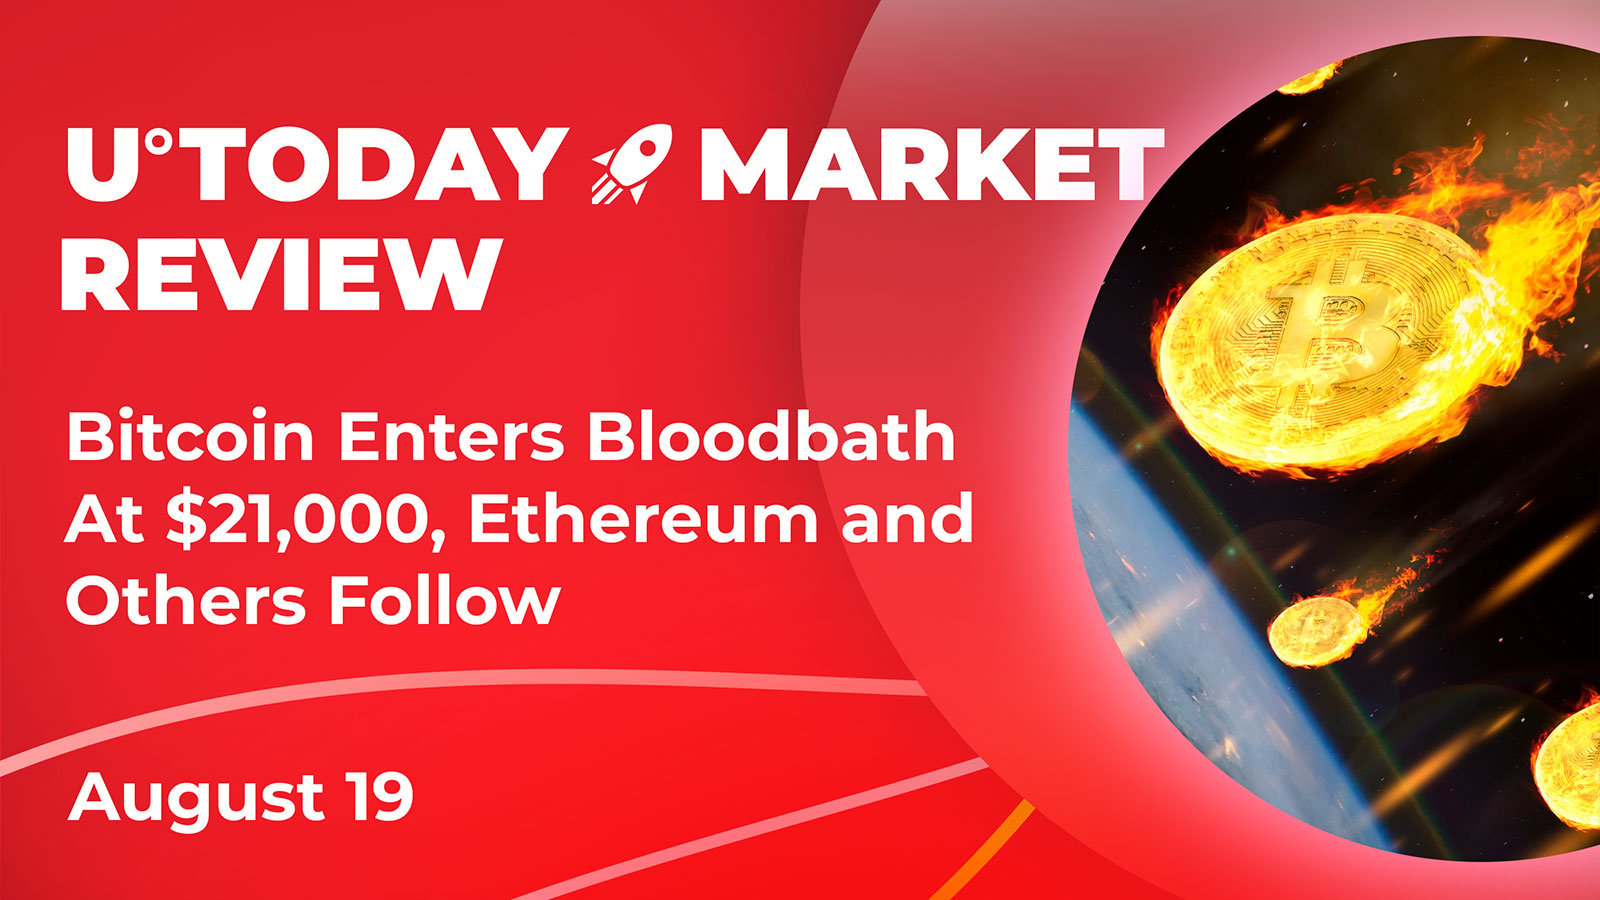 Bitcoin Enters Bloodbath at $21,000, Ethereum and Others Follow: Crypto Market Review, August 19